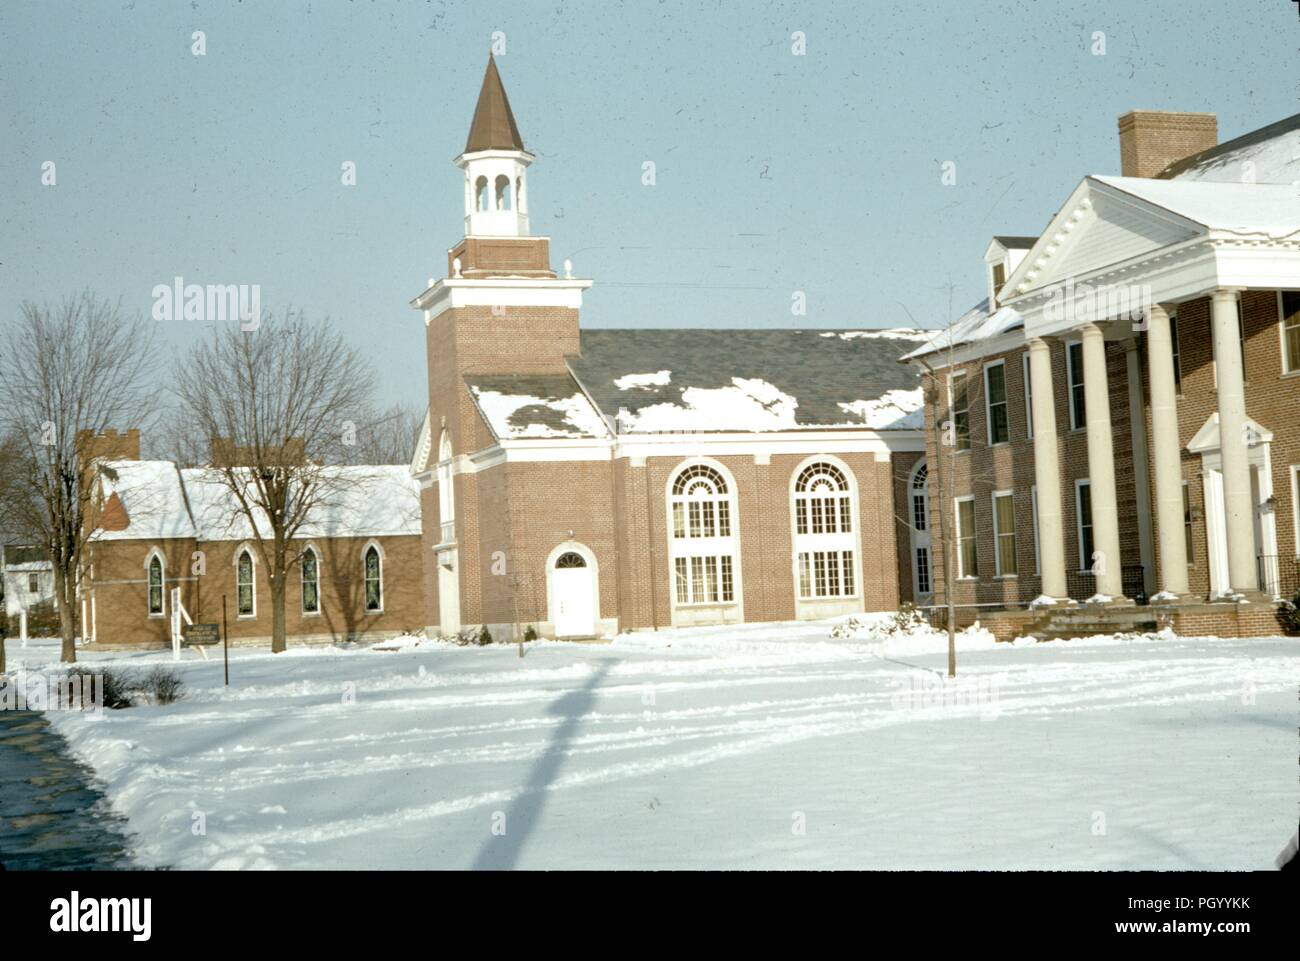 Chapel and other buildings on a snowy day at Asbury University, a Christian liberal arts university in Wilmore, Kentucky, 1955. () Stock Photo